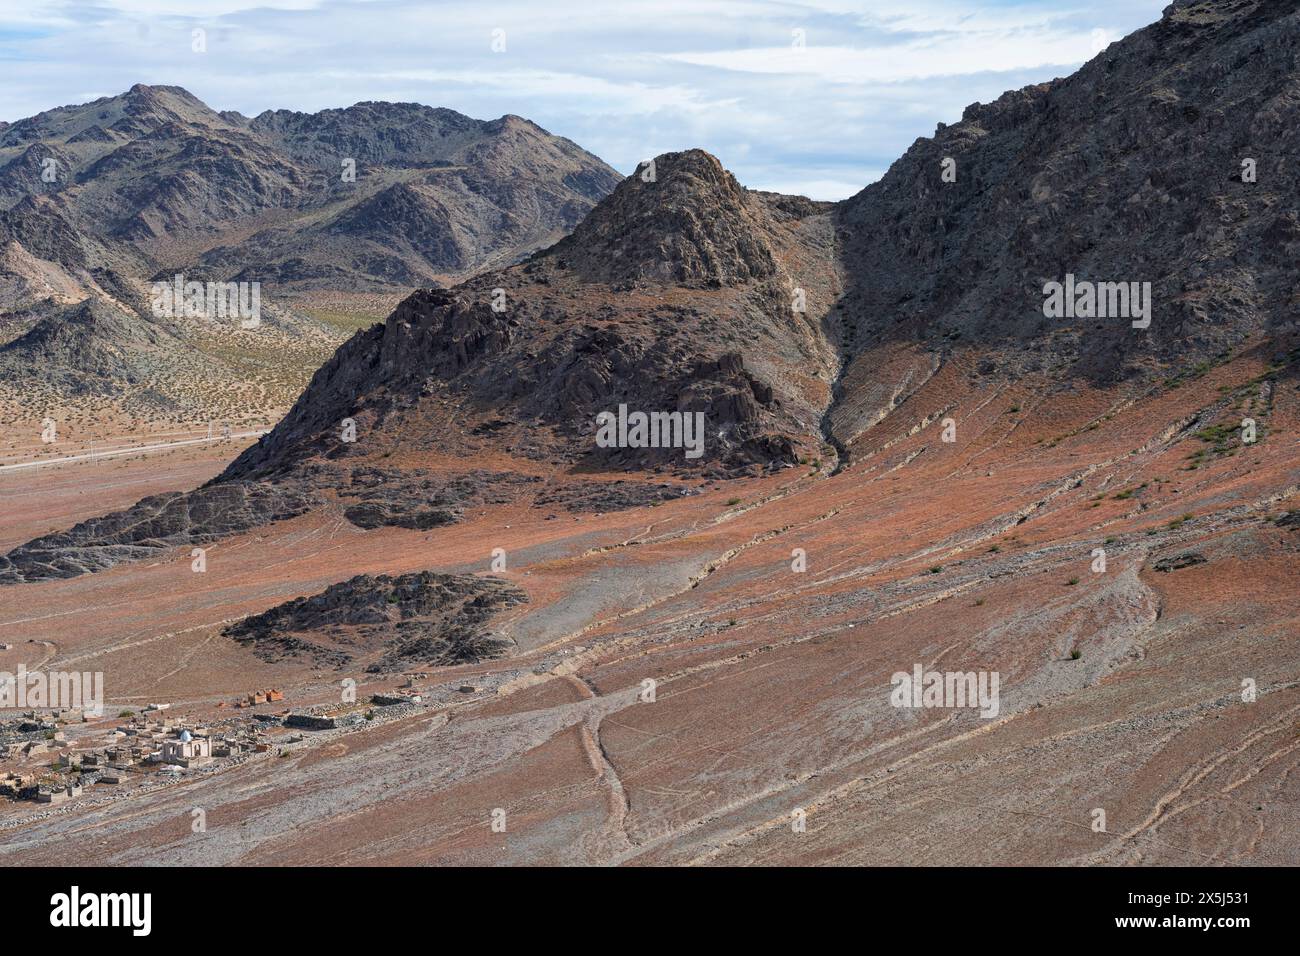 Asia, Mongolia, Bayan-Olgii Province, Olgii. The mountains surrounding Olgii are rough and rocky. Stock Photo